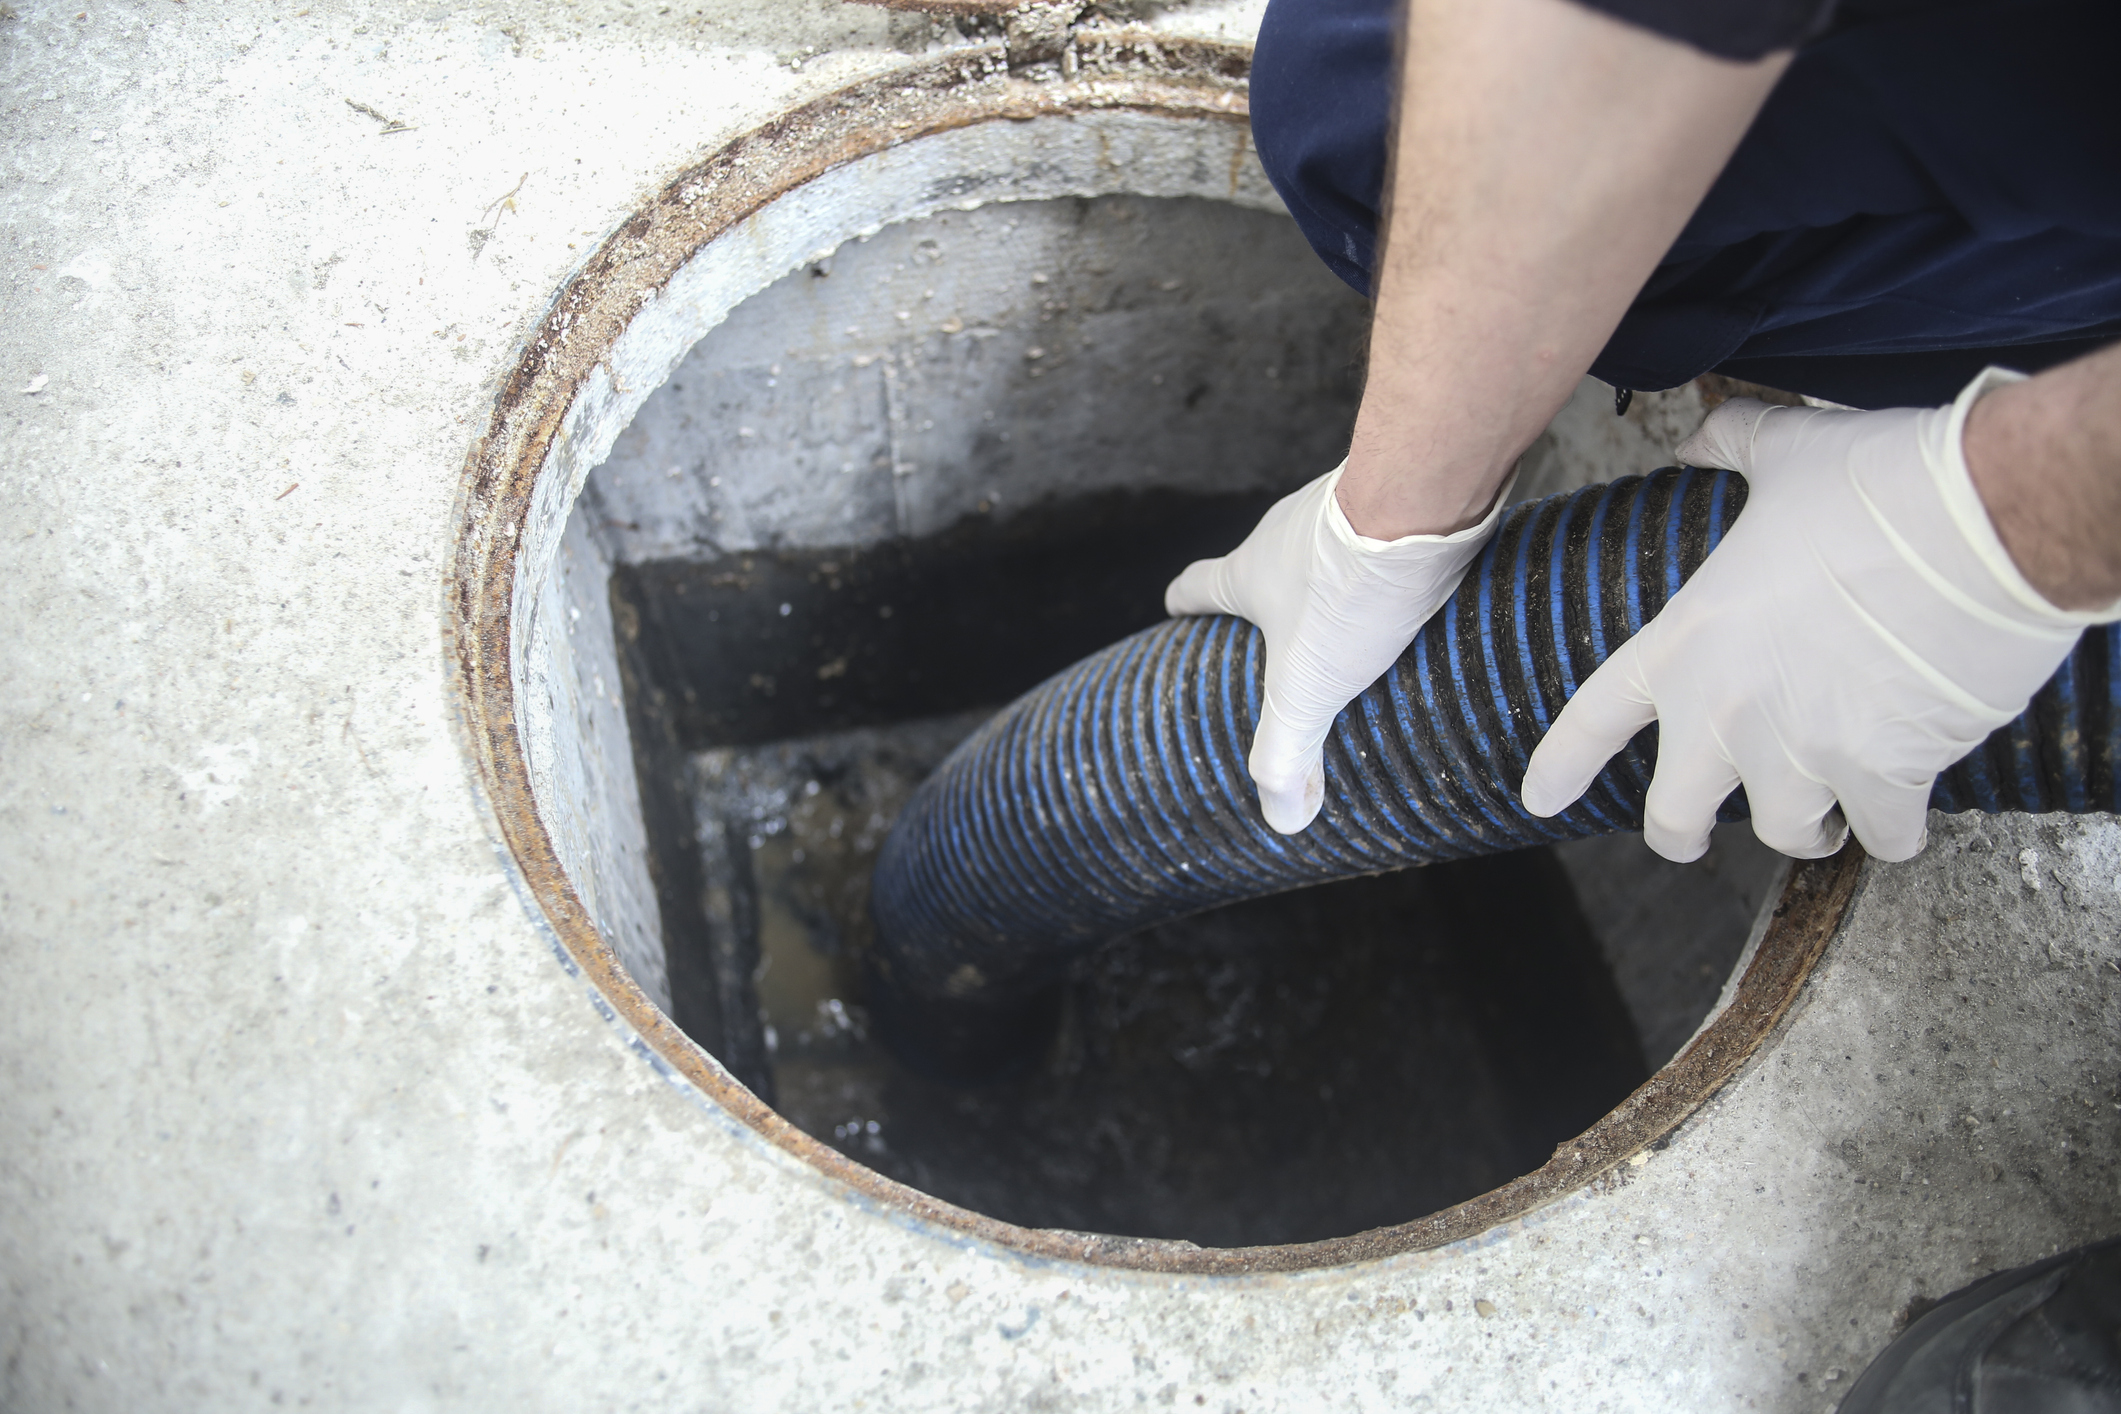 Worker cleaning the sewage system